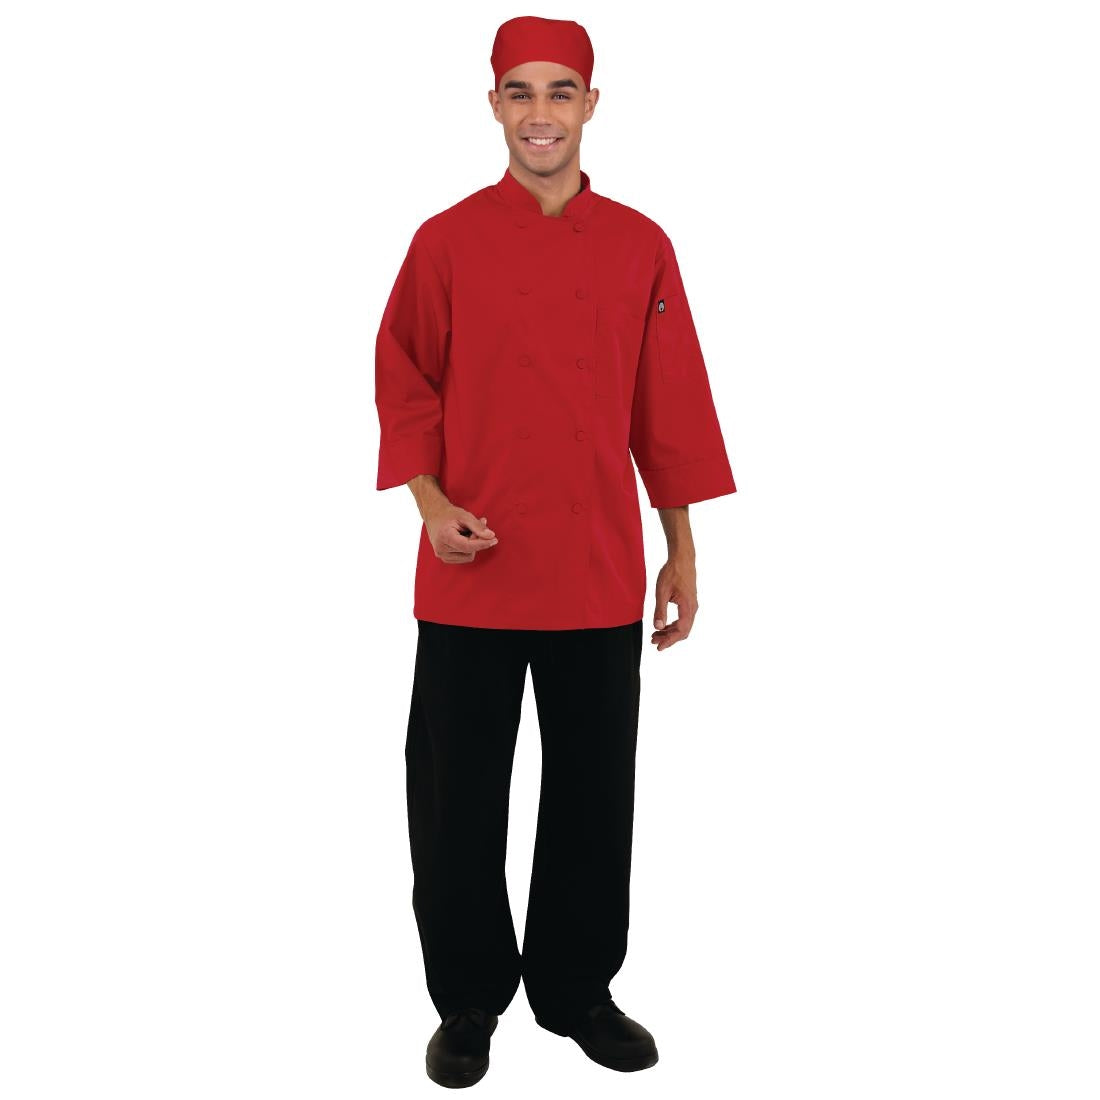 B106-XS Chef Works Unisex Jacket Red XS JD Catering Equipment Solutions Ltd